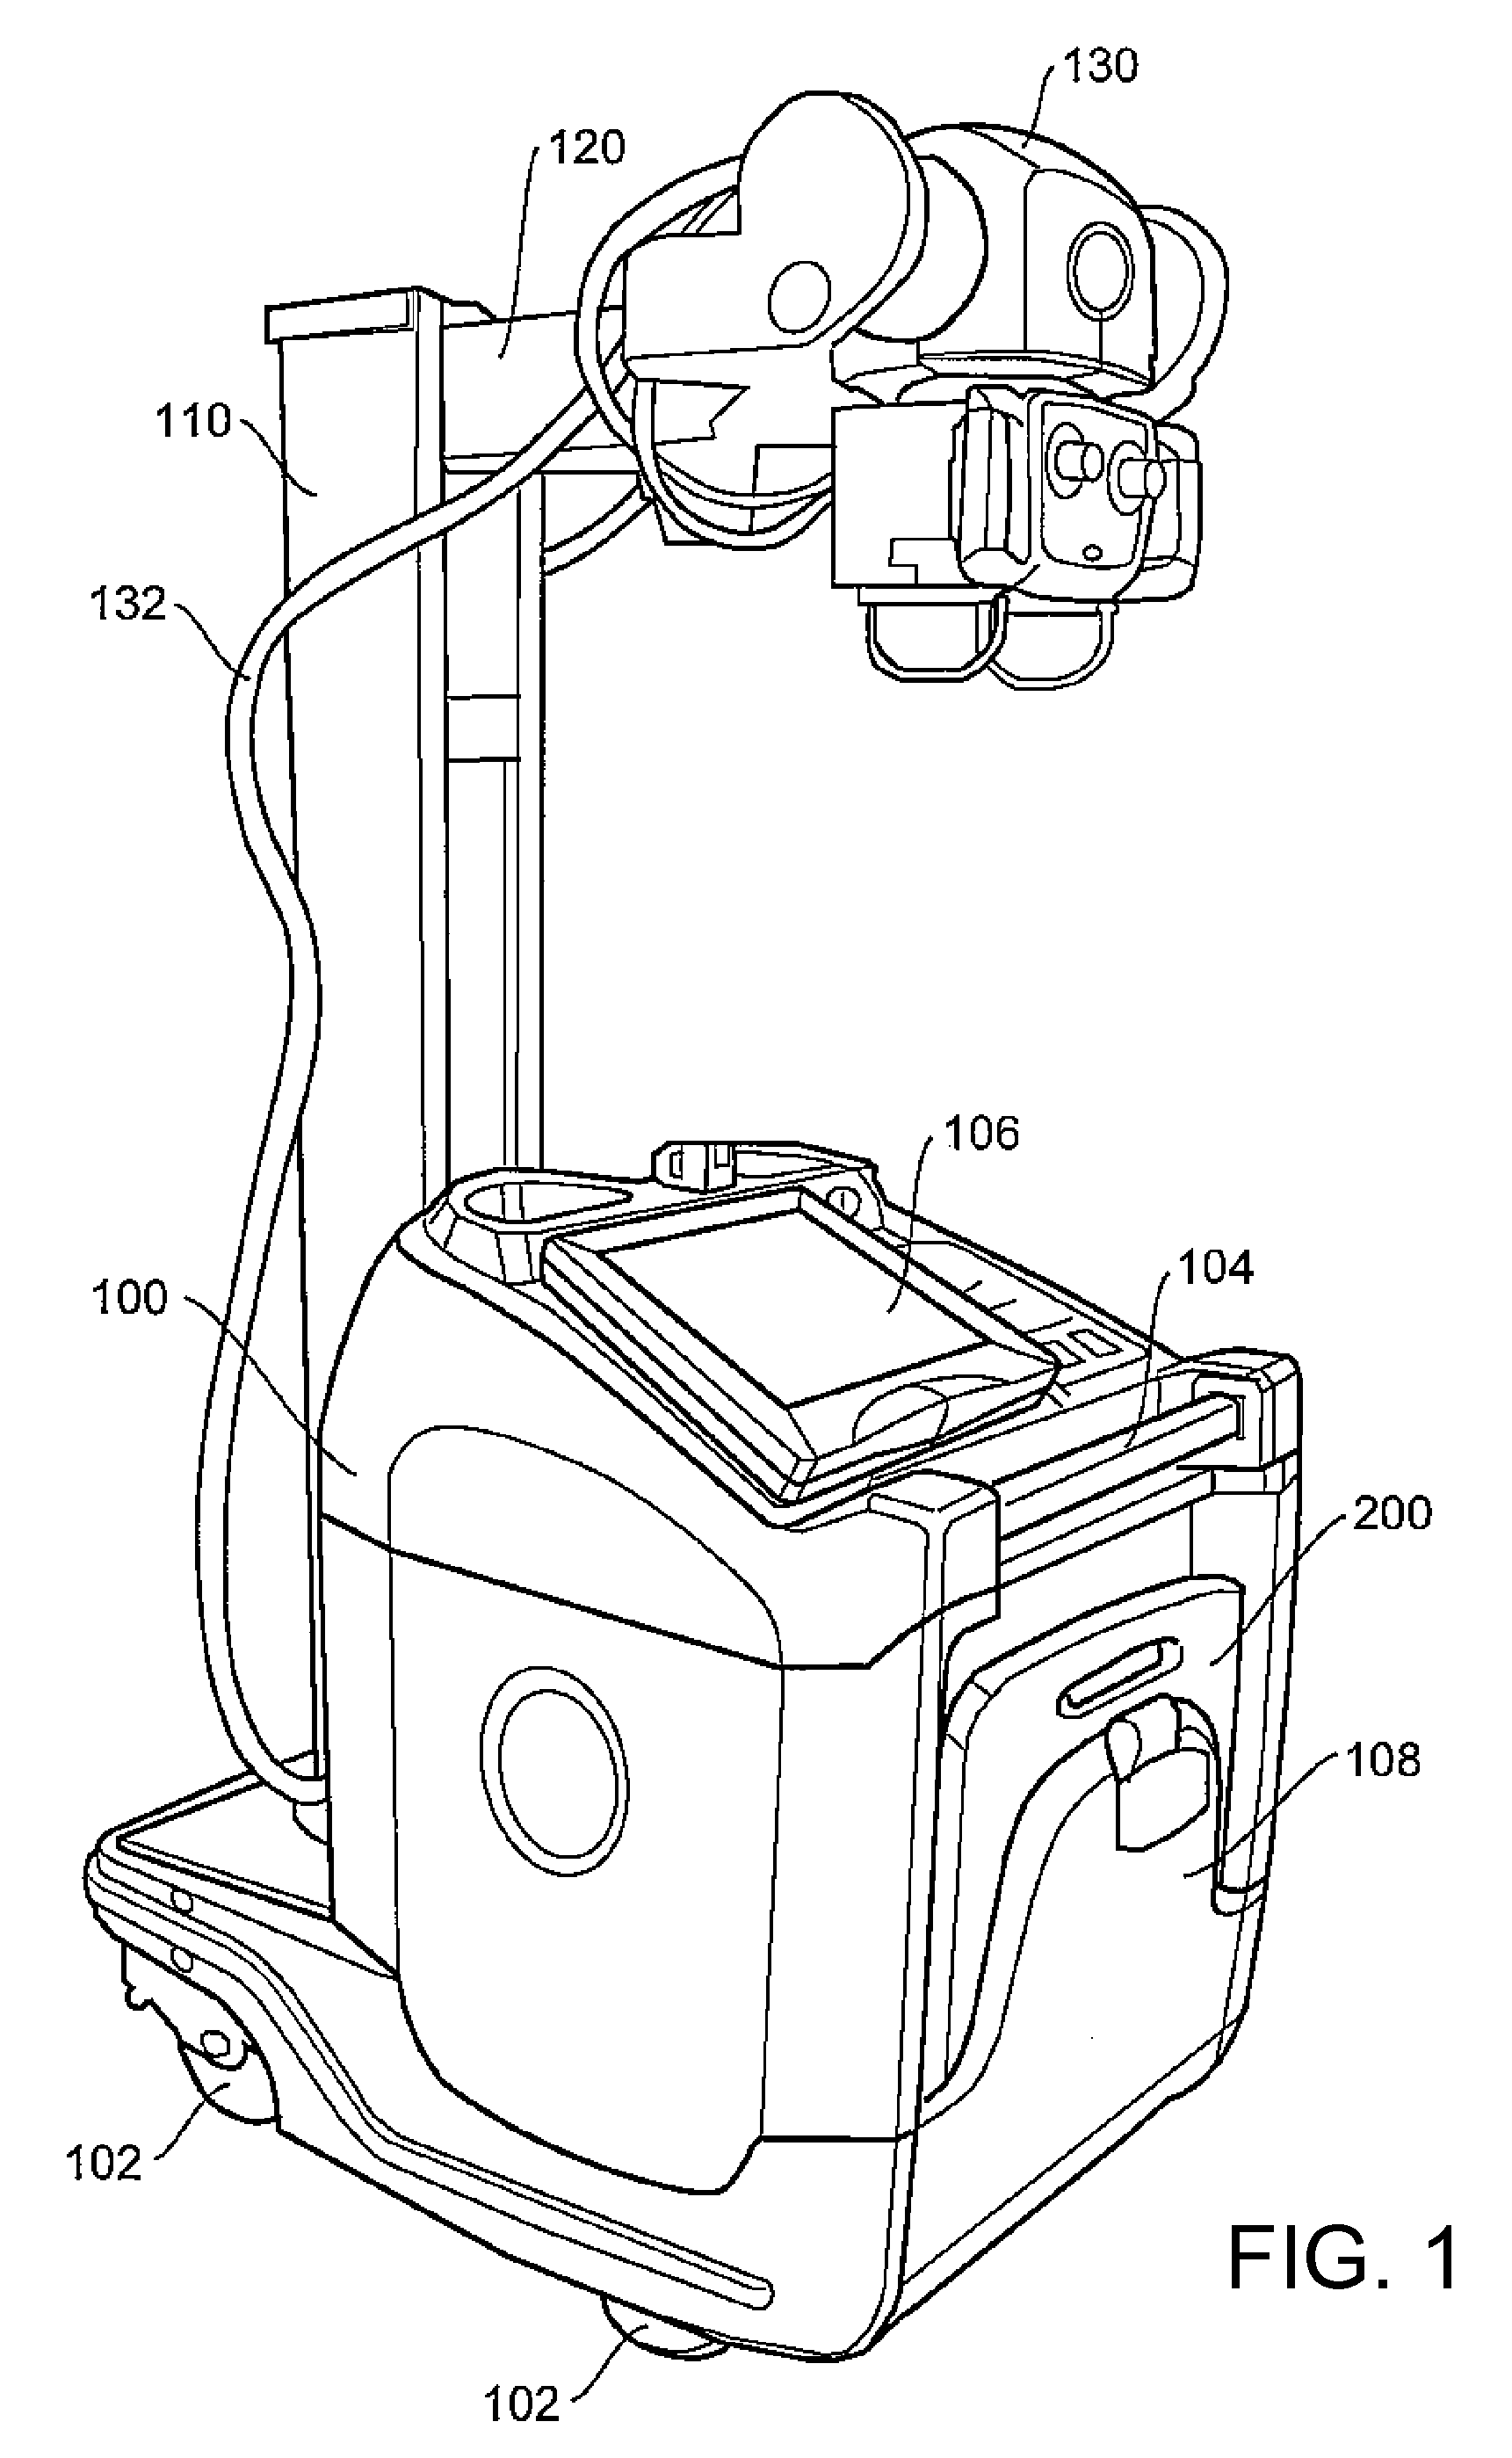 Detector panel and X-ray imaging apparatus